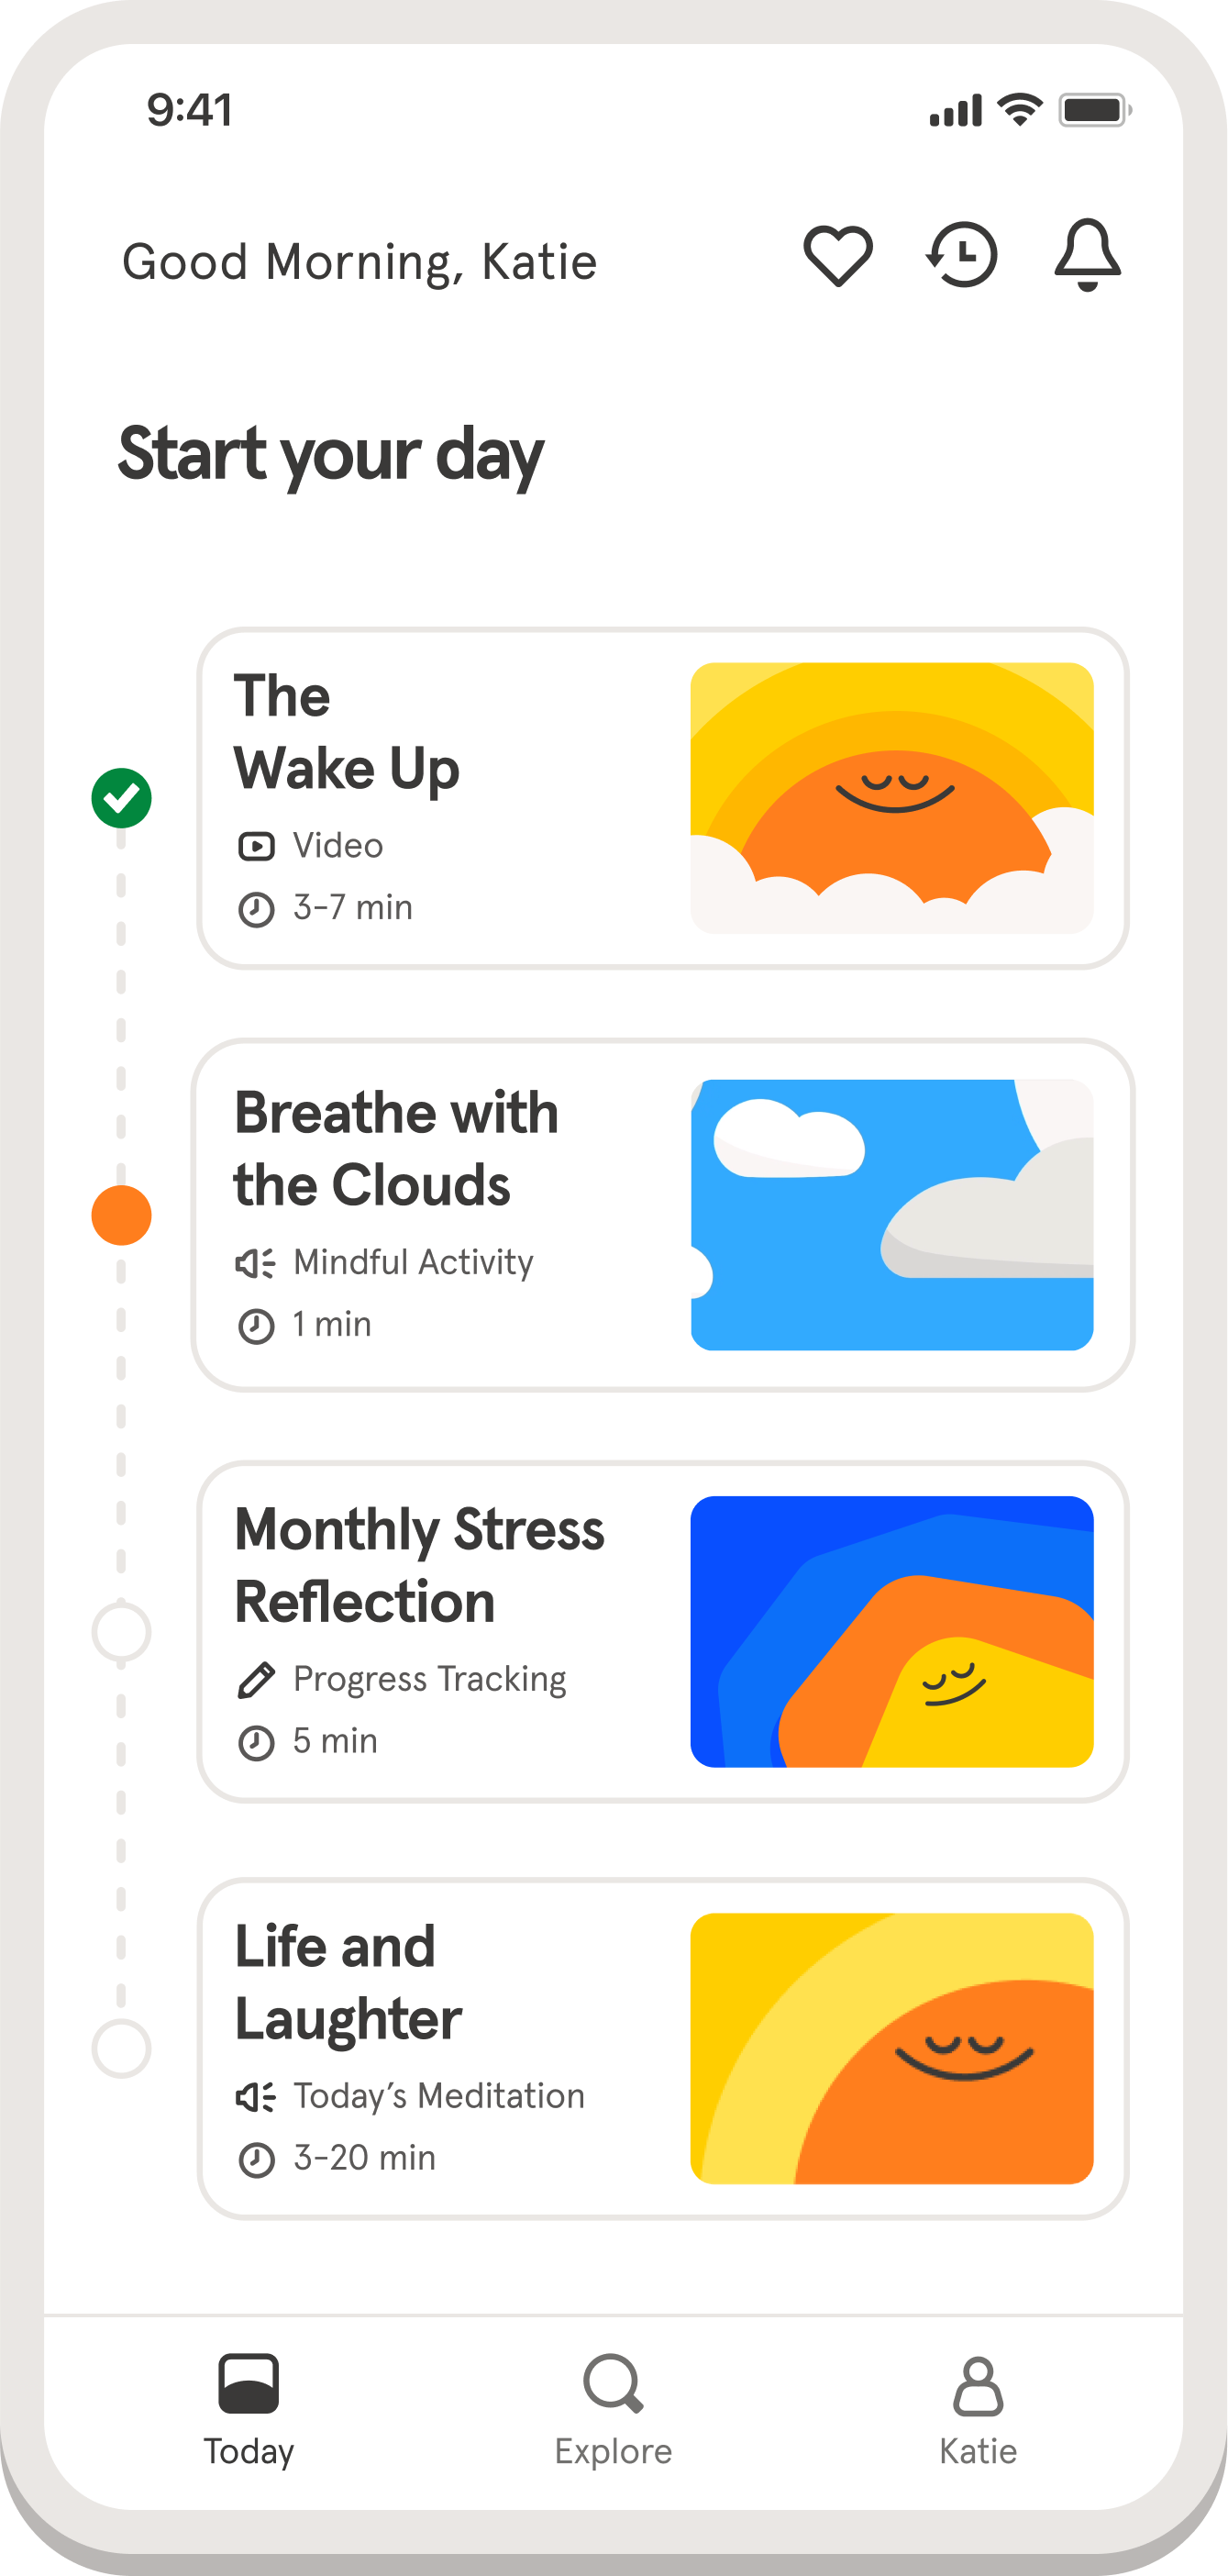 Mobile screen showing a wellness app with daily activities like breathing, reflection, and meditation